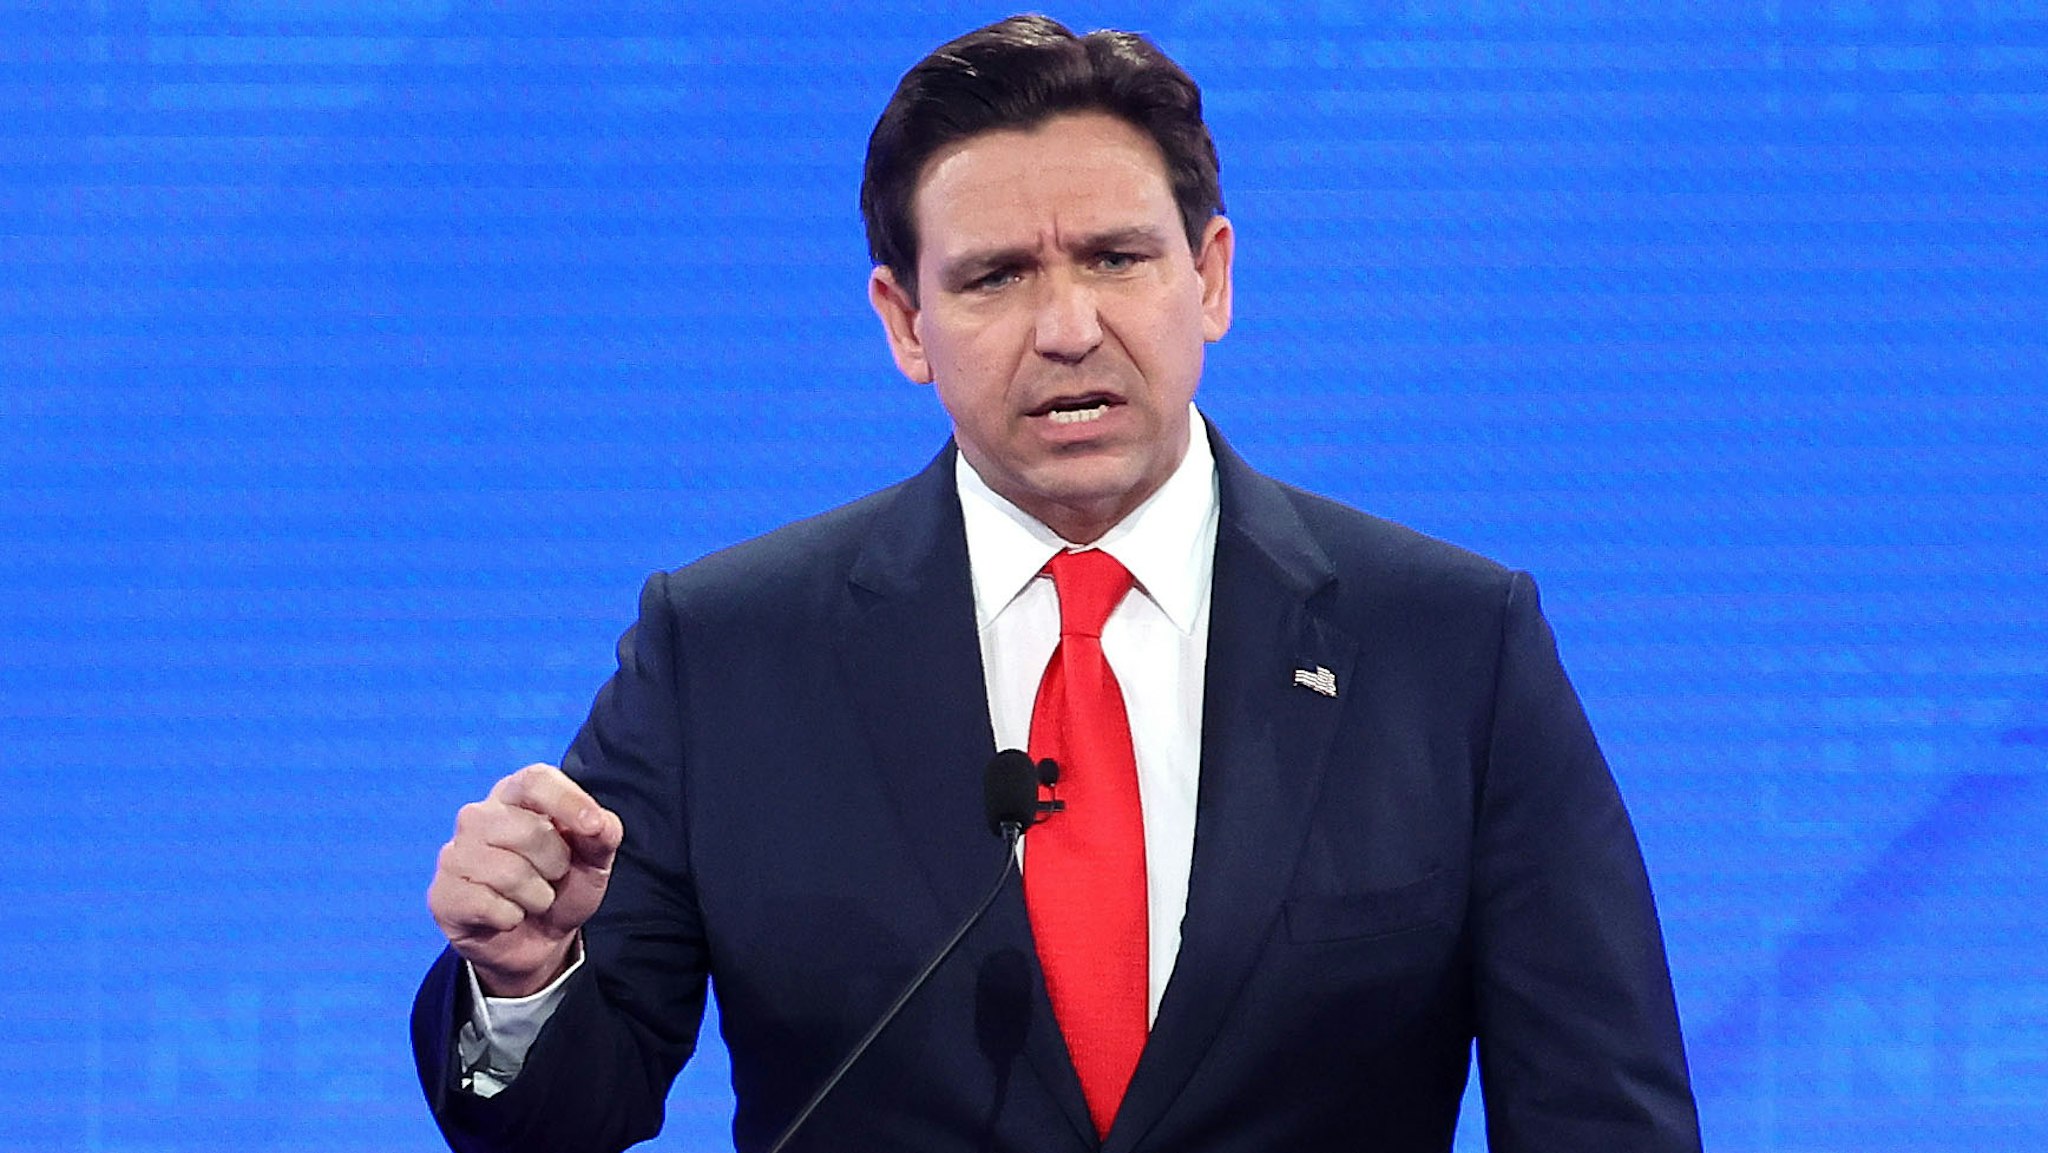 TUSCALOOSA, ALABAMA - DECEMBER 06: Republican presidential candidate Florida Gov. Ron DeSantis participates in the NewsNation Republican Presidential Primary Debate at the University of Alabama Moody Music Hall on December 6, 2023 in Tuscaloosa, Alabama. The four presidential hopefuls squared off during the fourth Republican primary debate without current frontrunner and former U.S. President Donald Trump, who has declined to participate in any of the previous debates.